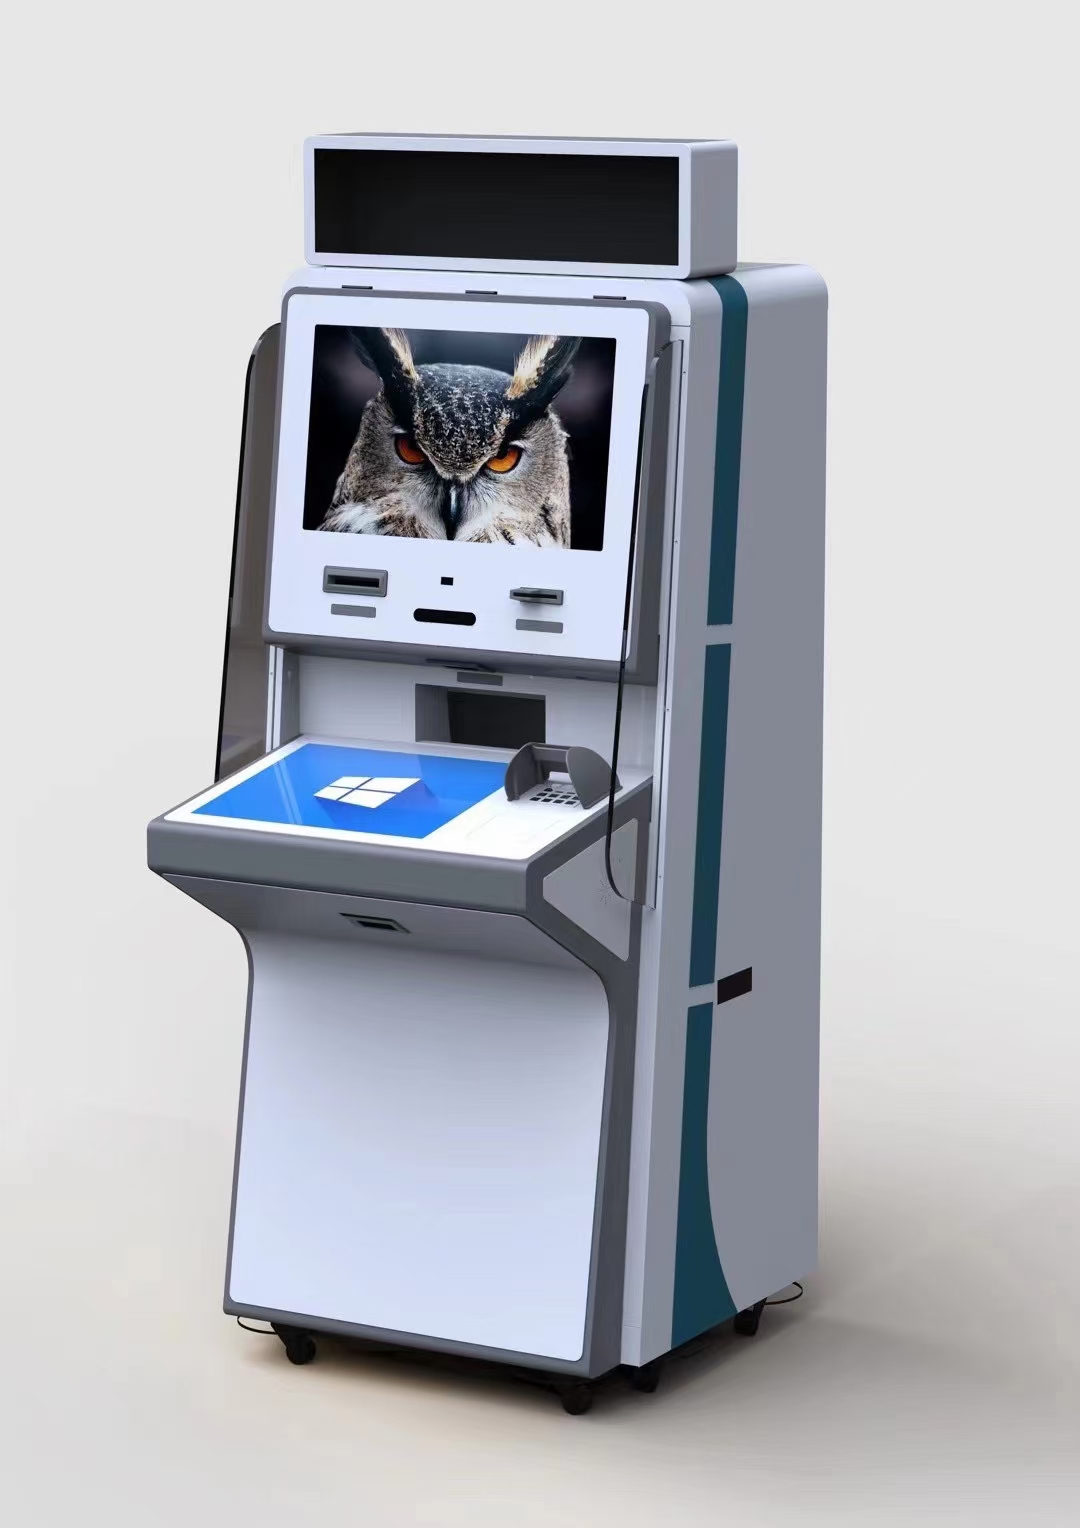 What are the advantages of self-service kiosk?